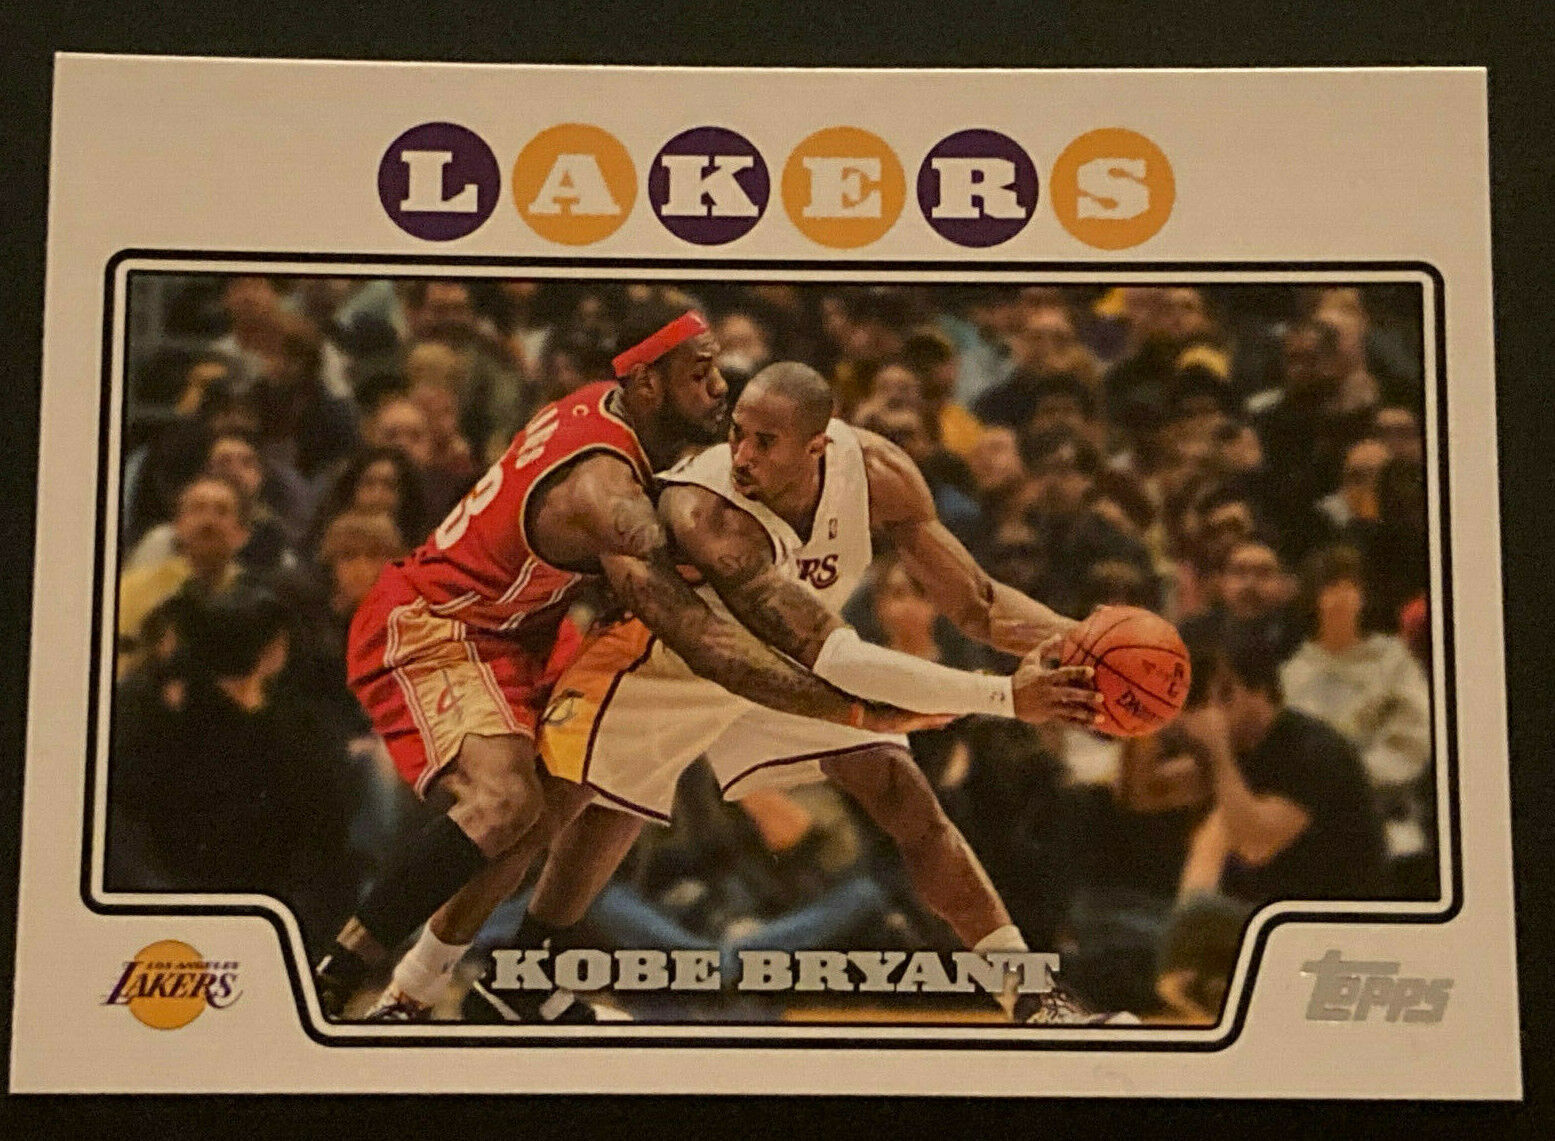 Kobe Bryant 2008-09 Topps # 24 very clean, see pictures; featuring Lebron James